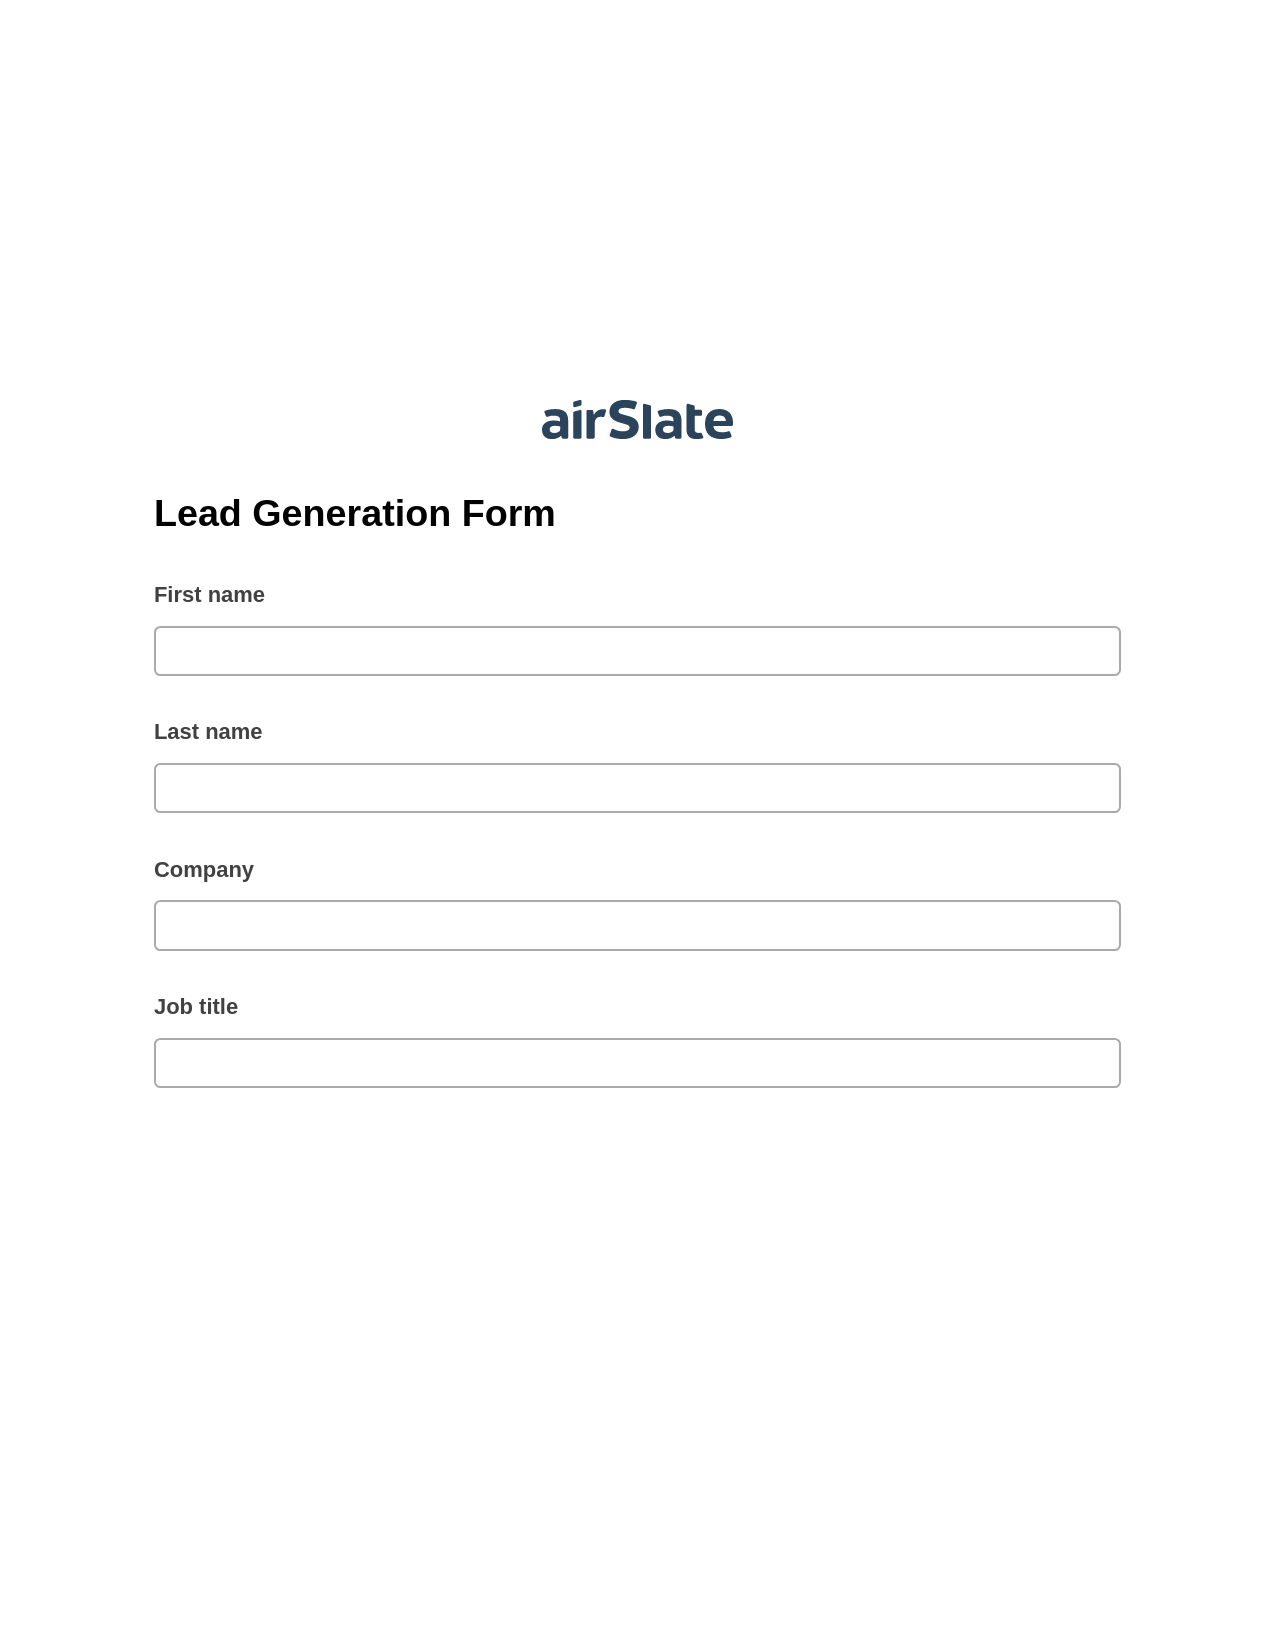 Multirole Lead Generation Form Pre-fill Dropdowns from Airtable, Remove Tags From Slate Bot, Export to Salesforce Record Bot